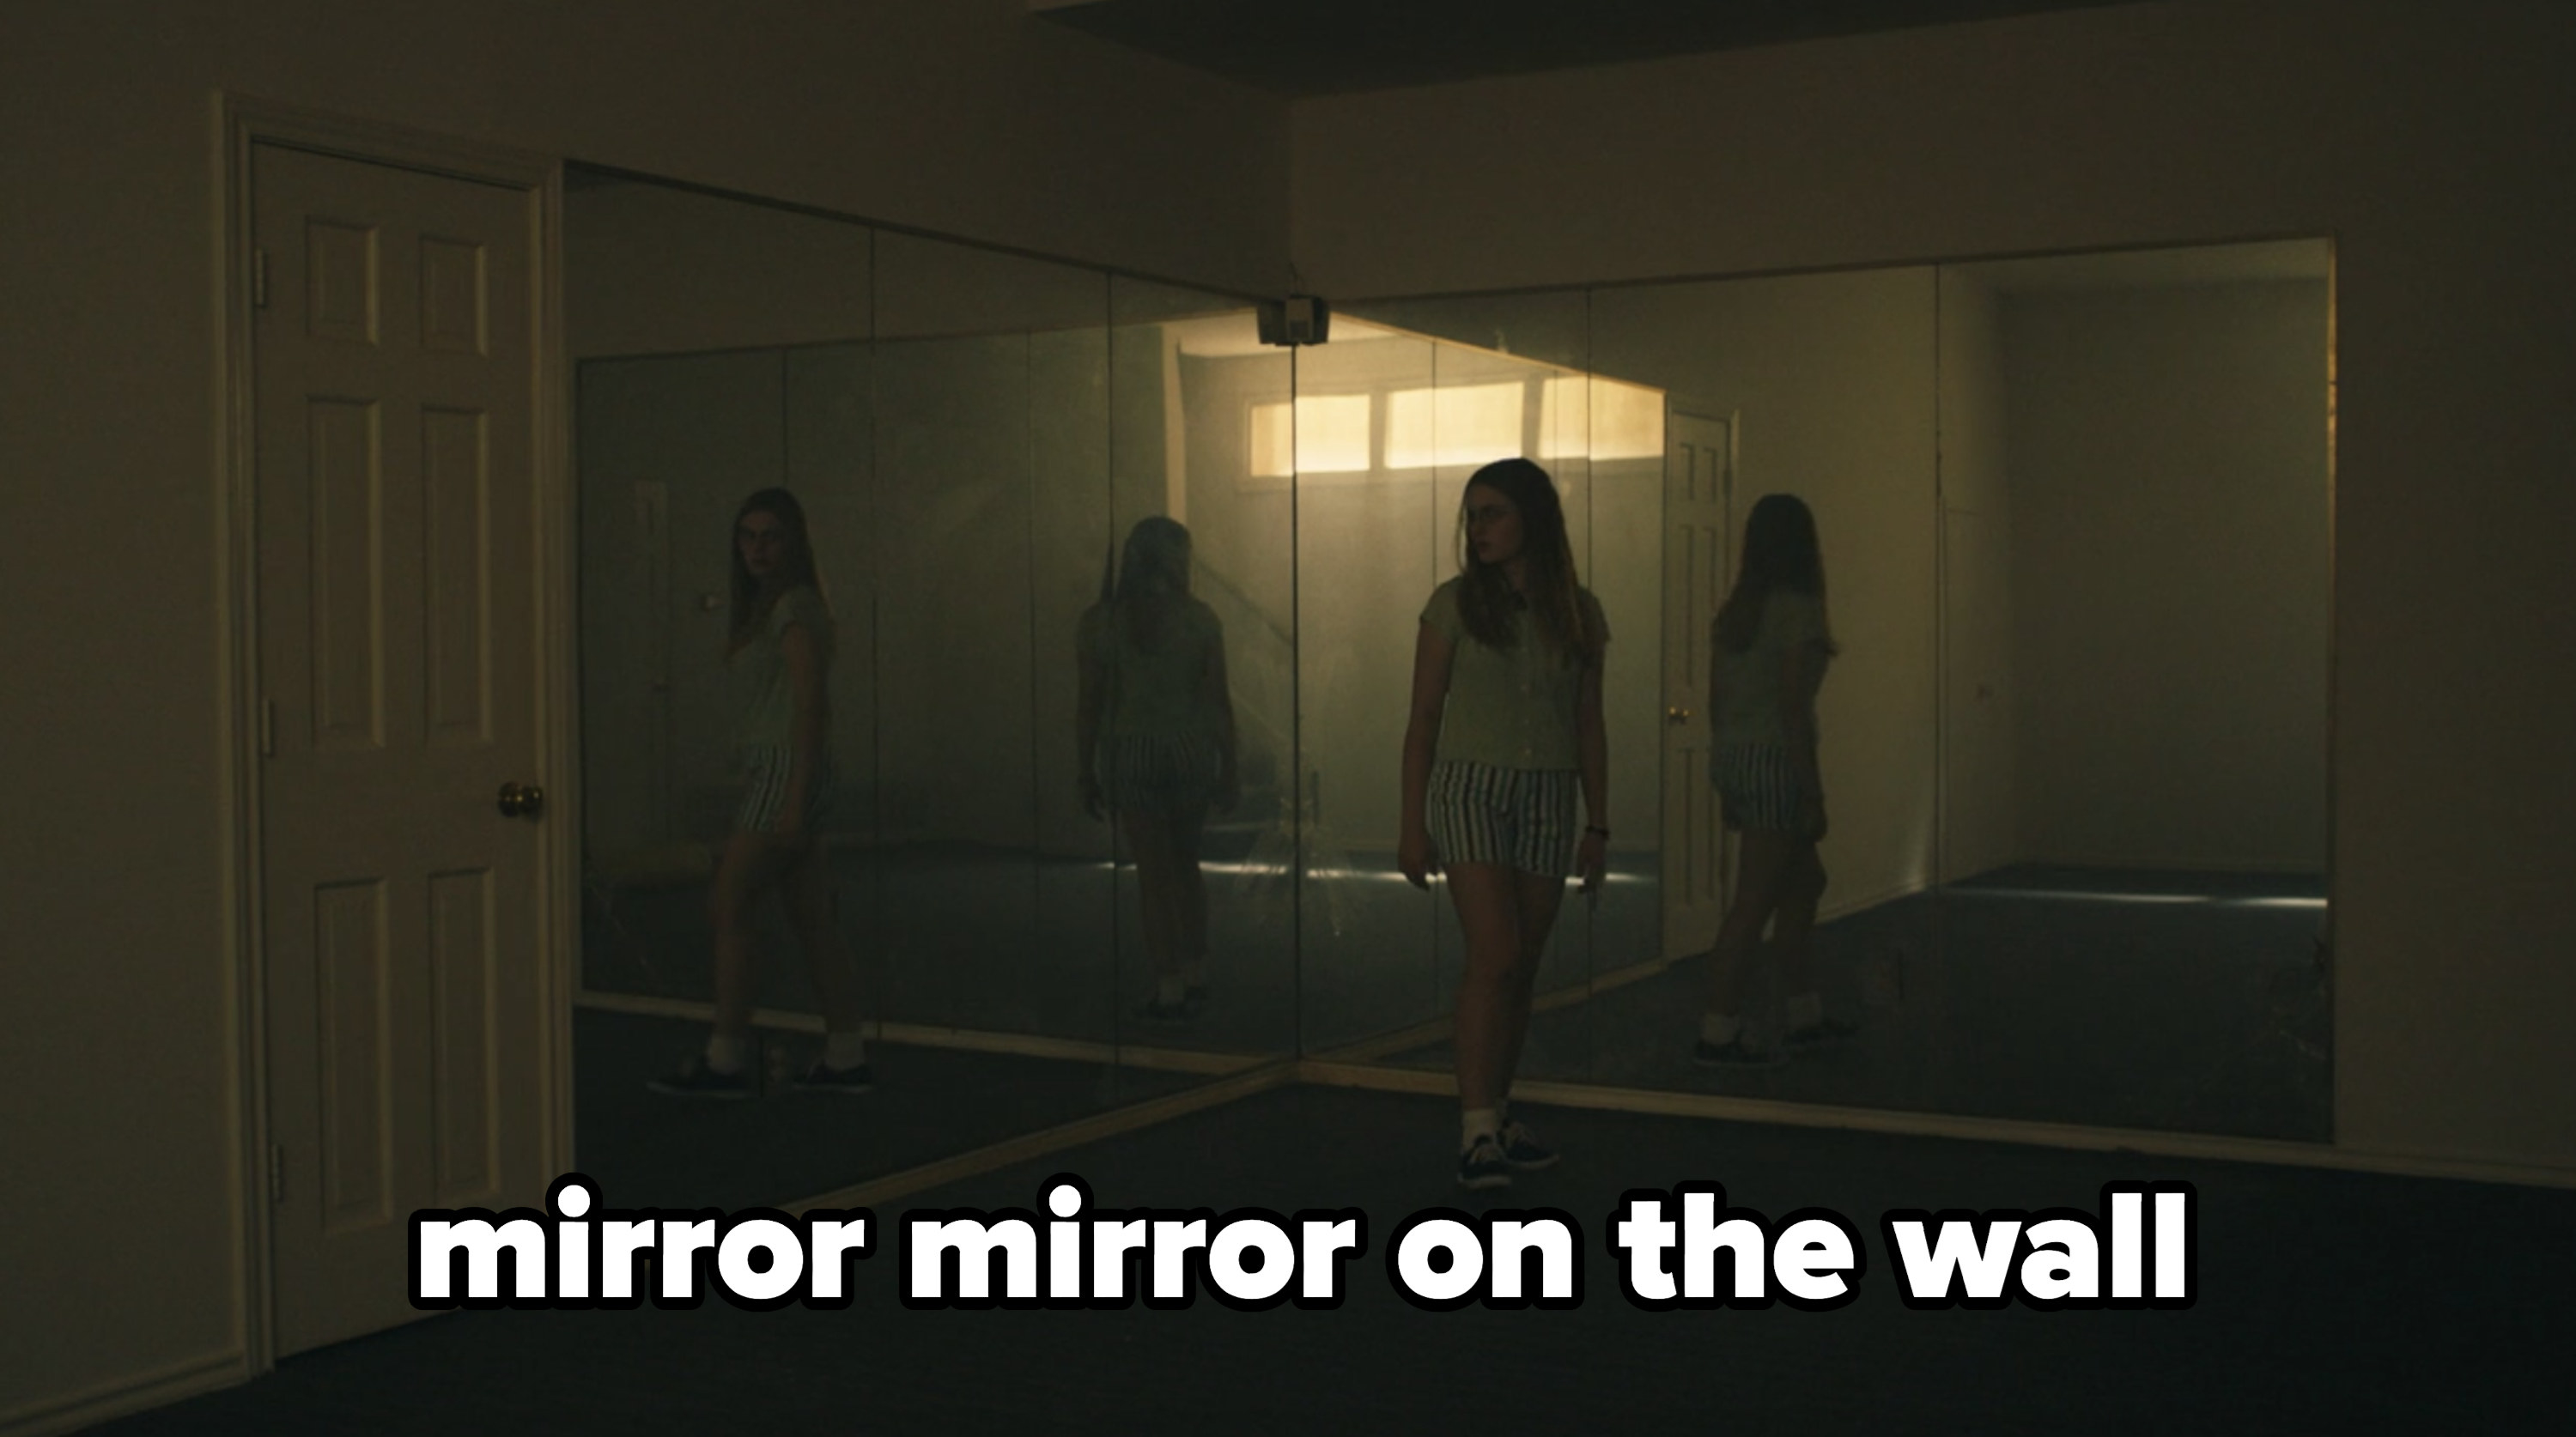 Jeanette in the mirror room with &quot;mirror mirror on the wall&quot;